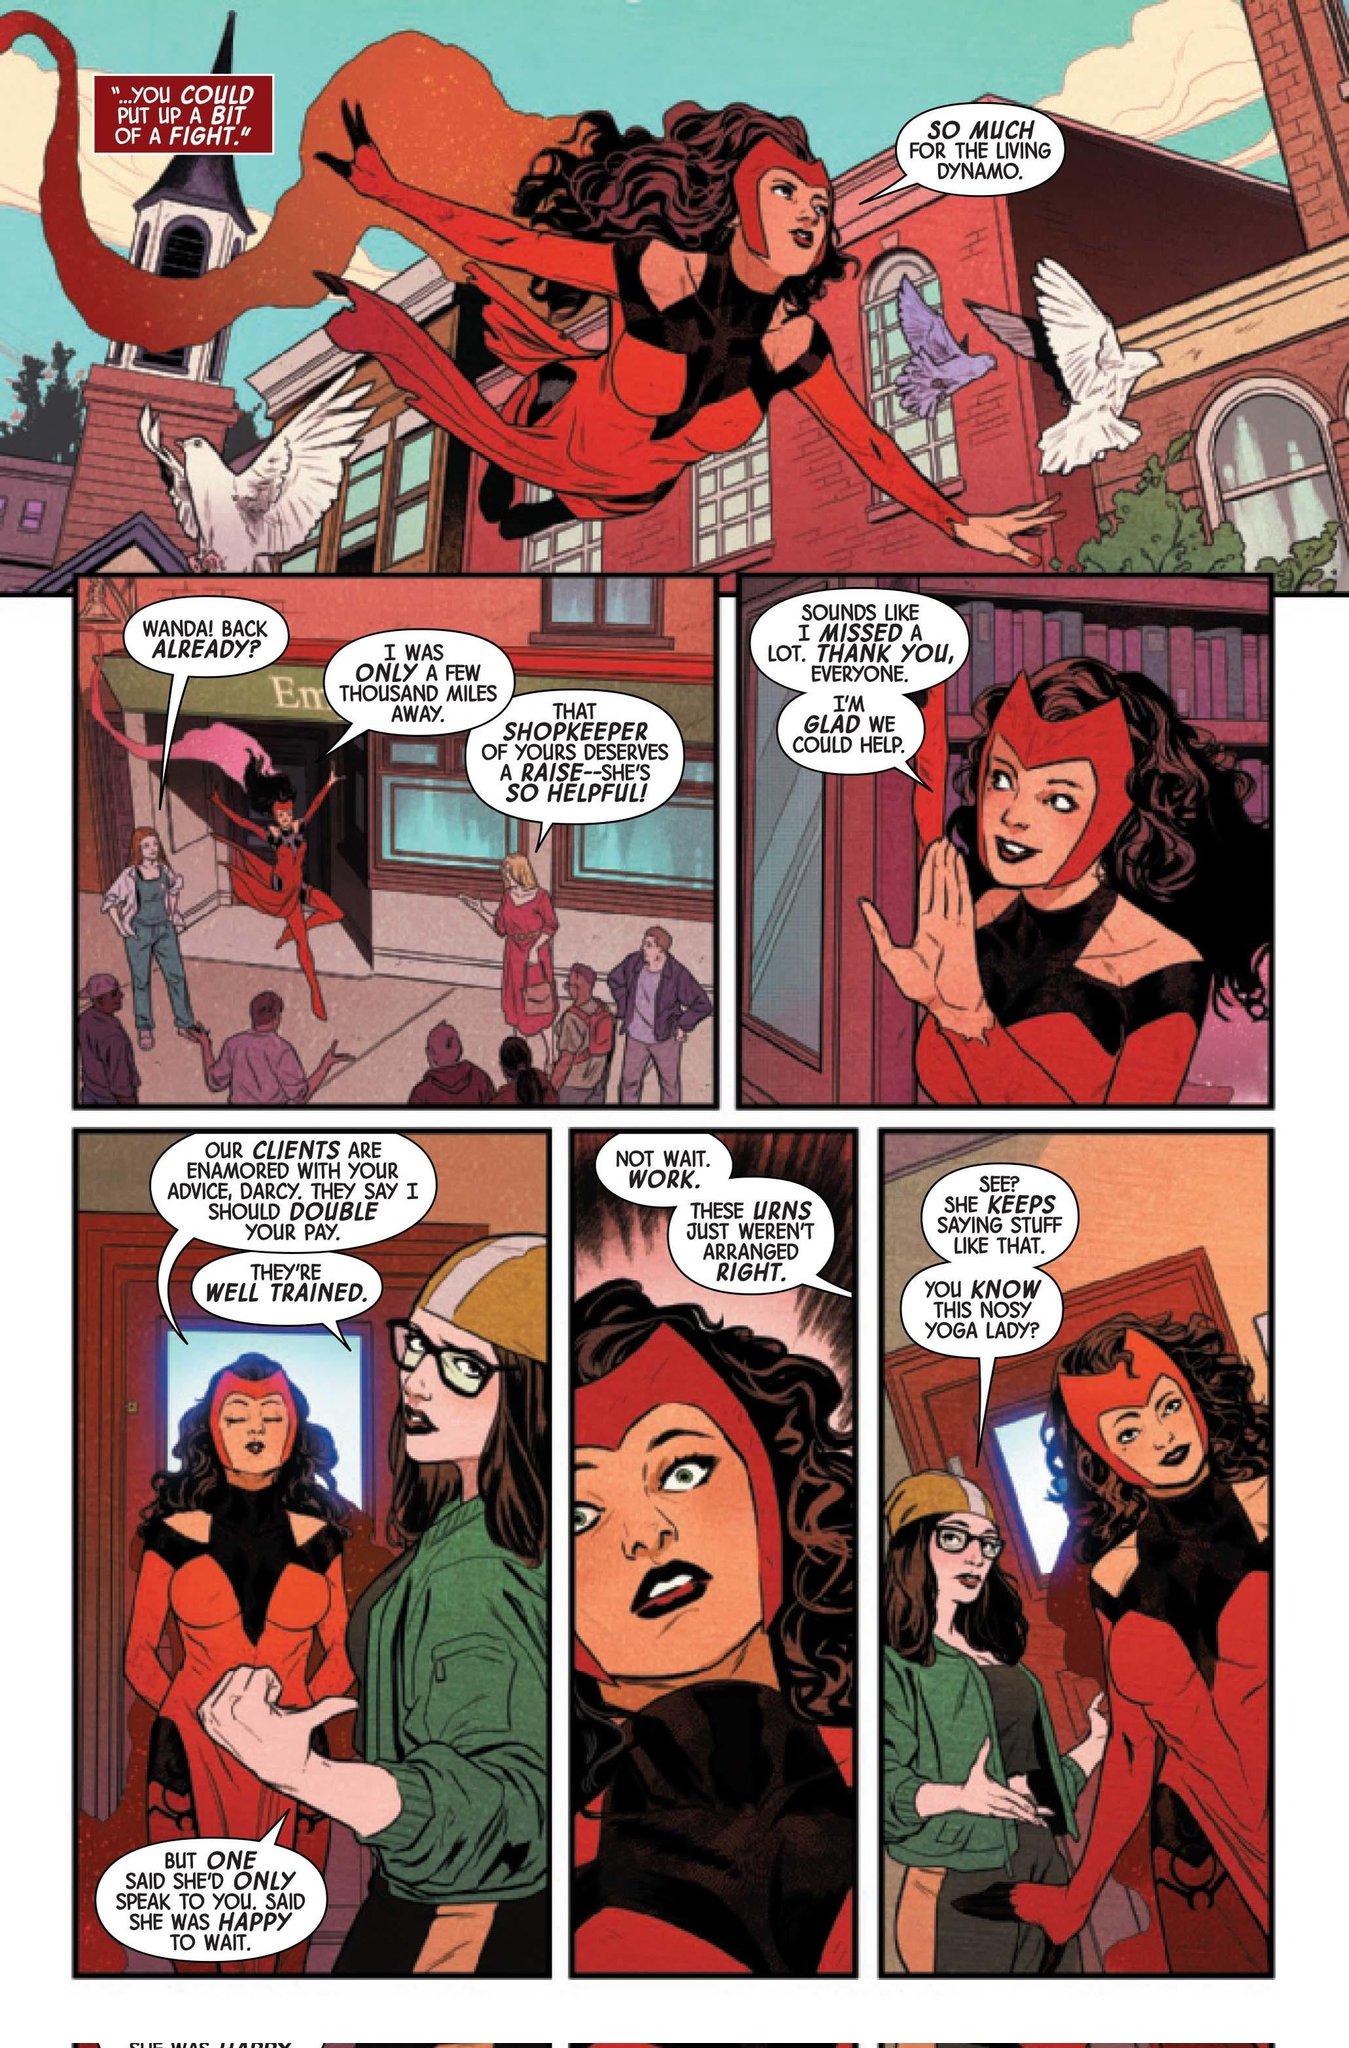 HERO of The HOPELESS! The Scarlet Witch/Wanda Maximoff Appreciation 2023!  - Page 171